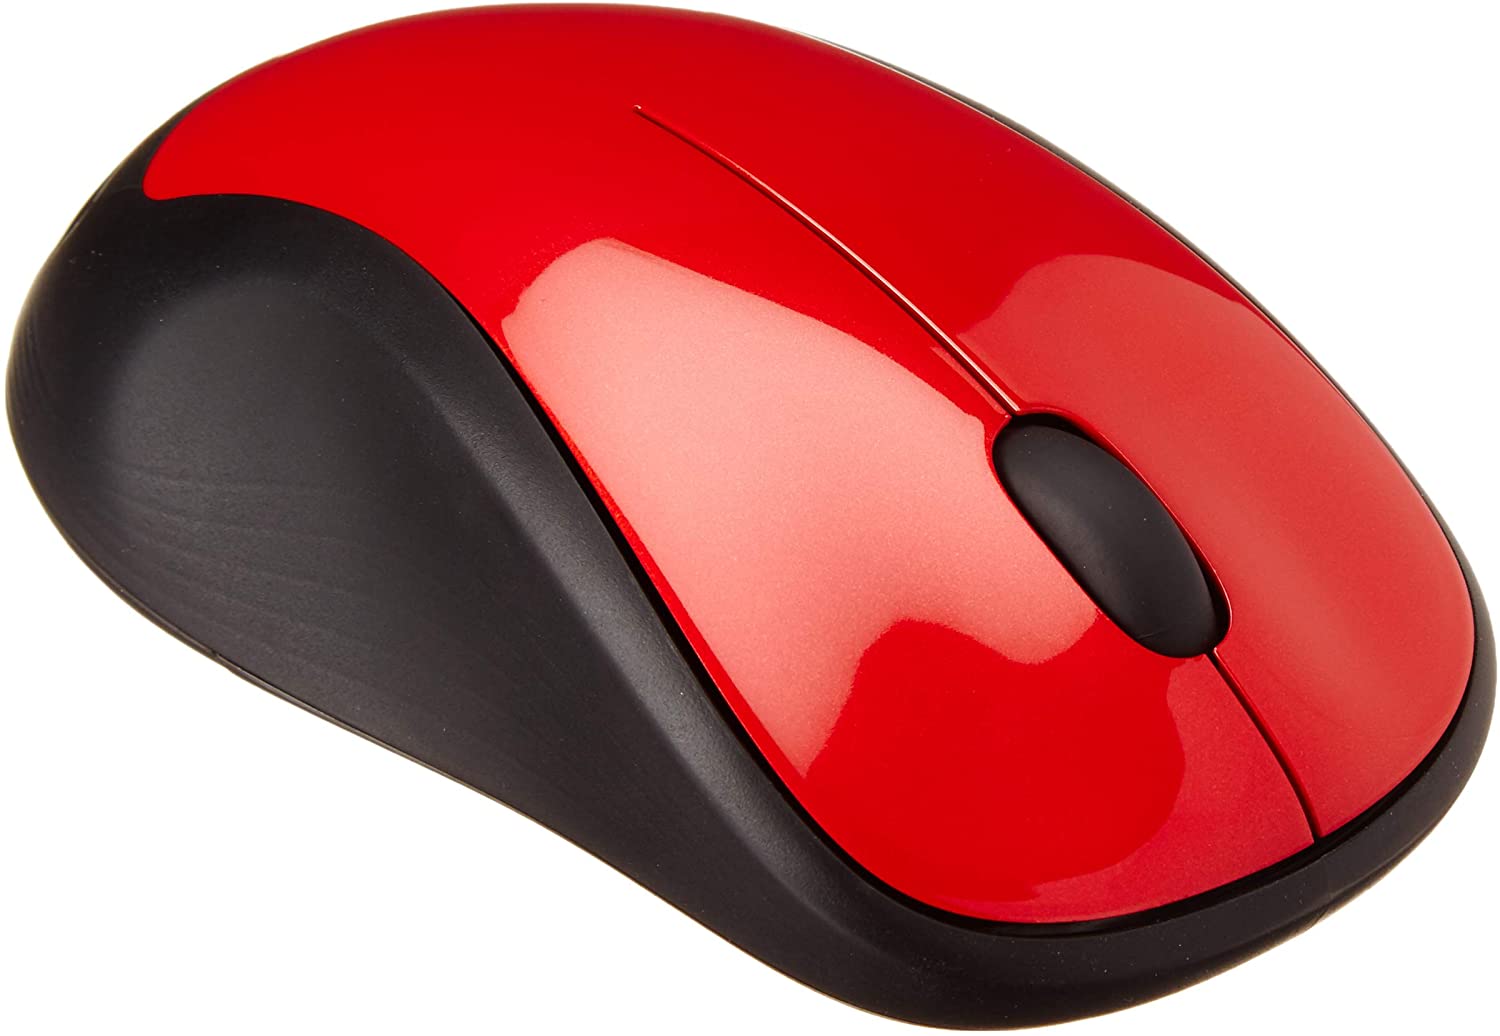 Logitech M310 red Full Size Wireless Mouse